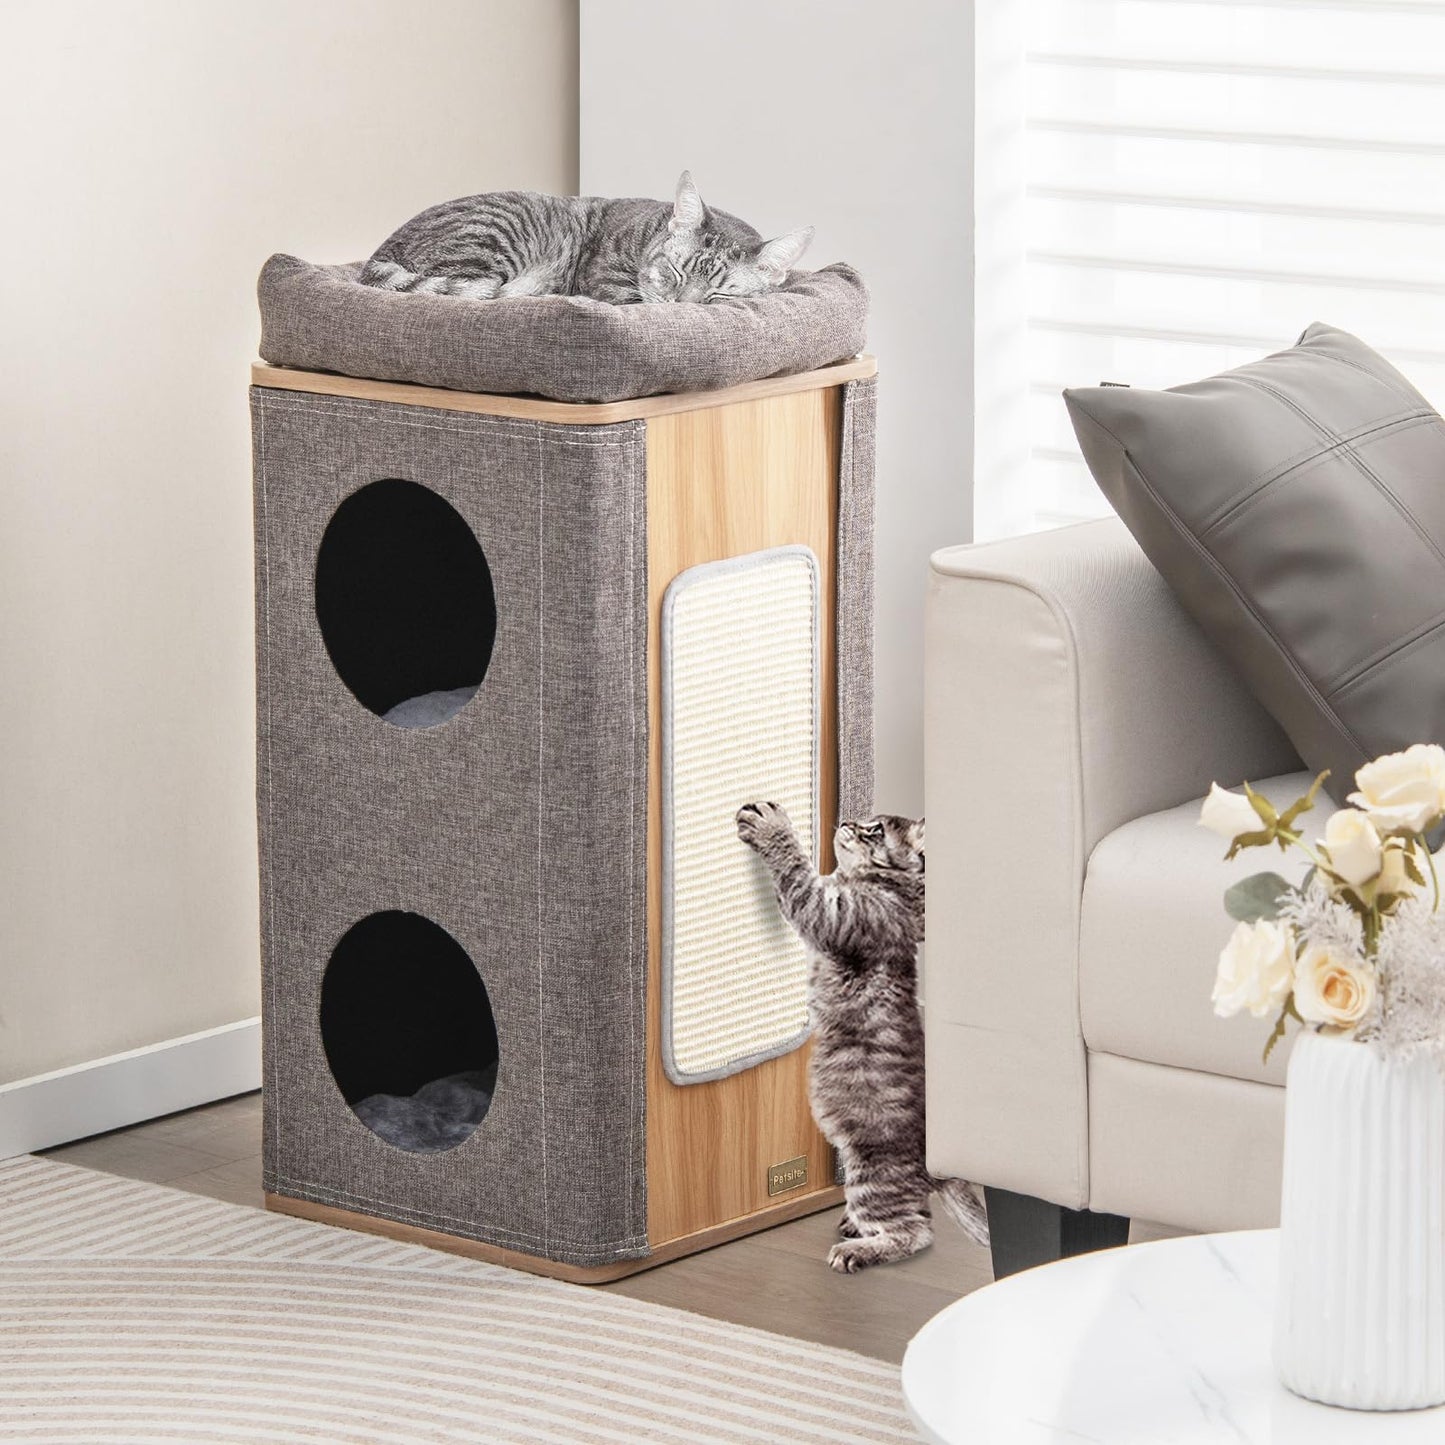 Tangkula 3-Story Cat Tree Condo, Wooden Cat House with Scratching Board, 2 Hideaways & Removable Soft Top Plush Bed, Modern Barrel-Shaped Cat Tower Furniture for Indoor Cats (Grey)